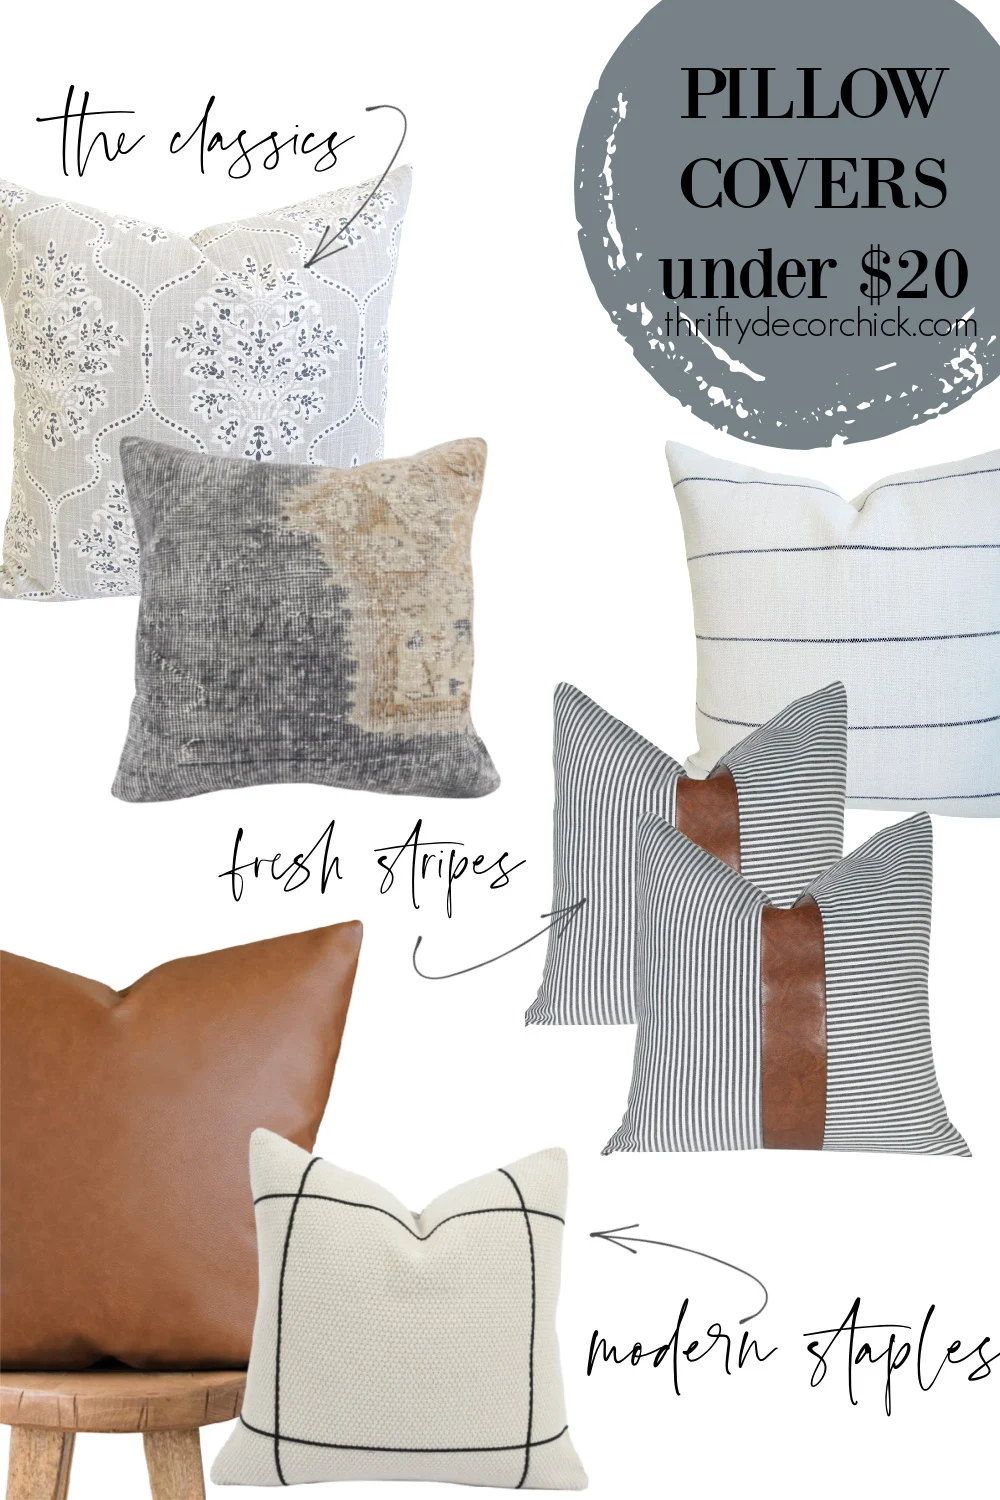 pillow covers under $20